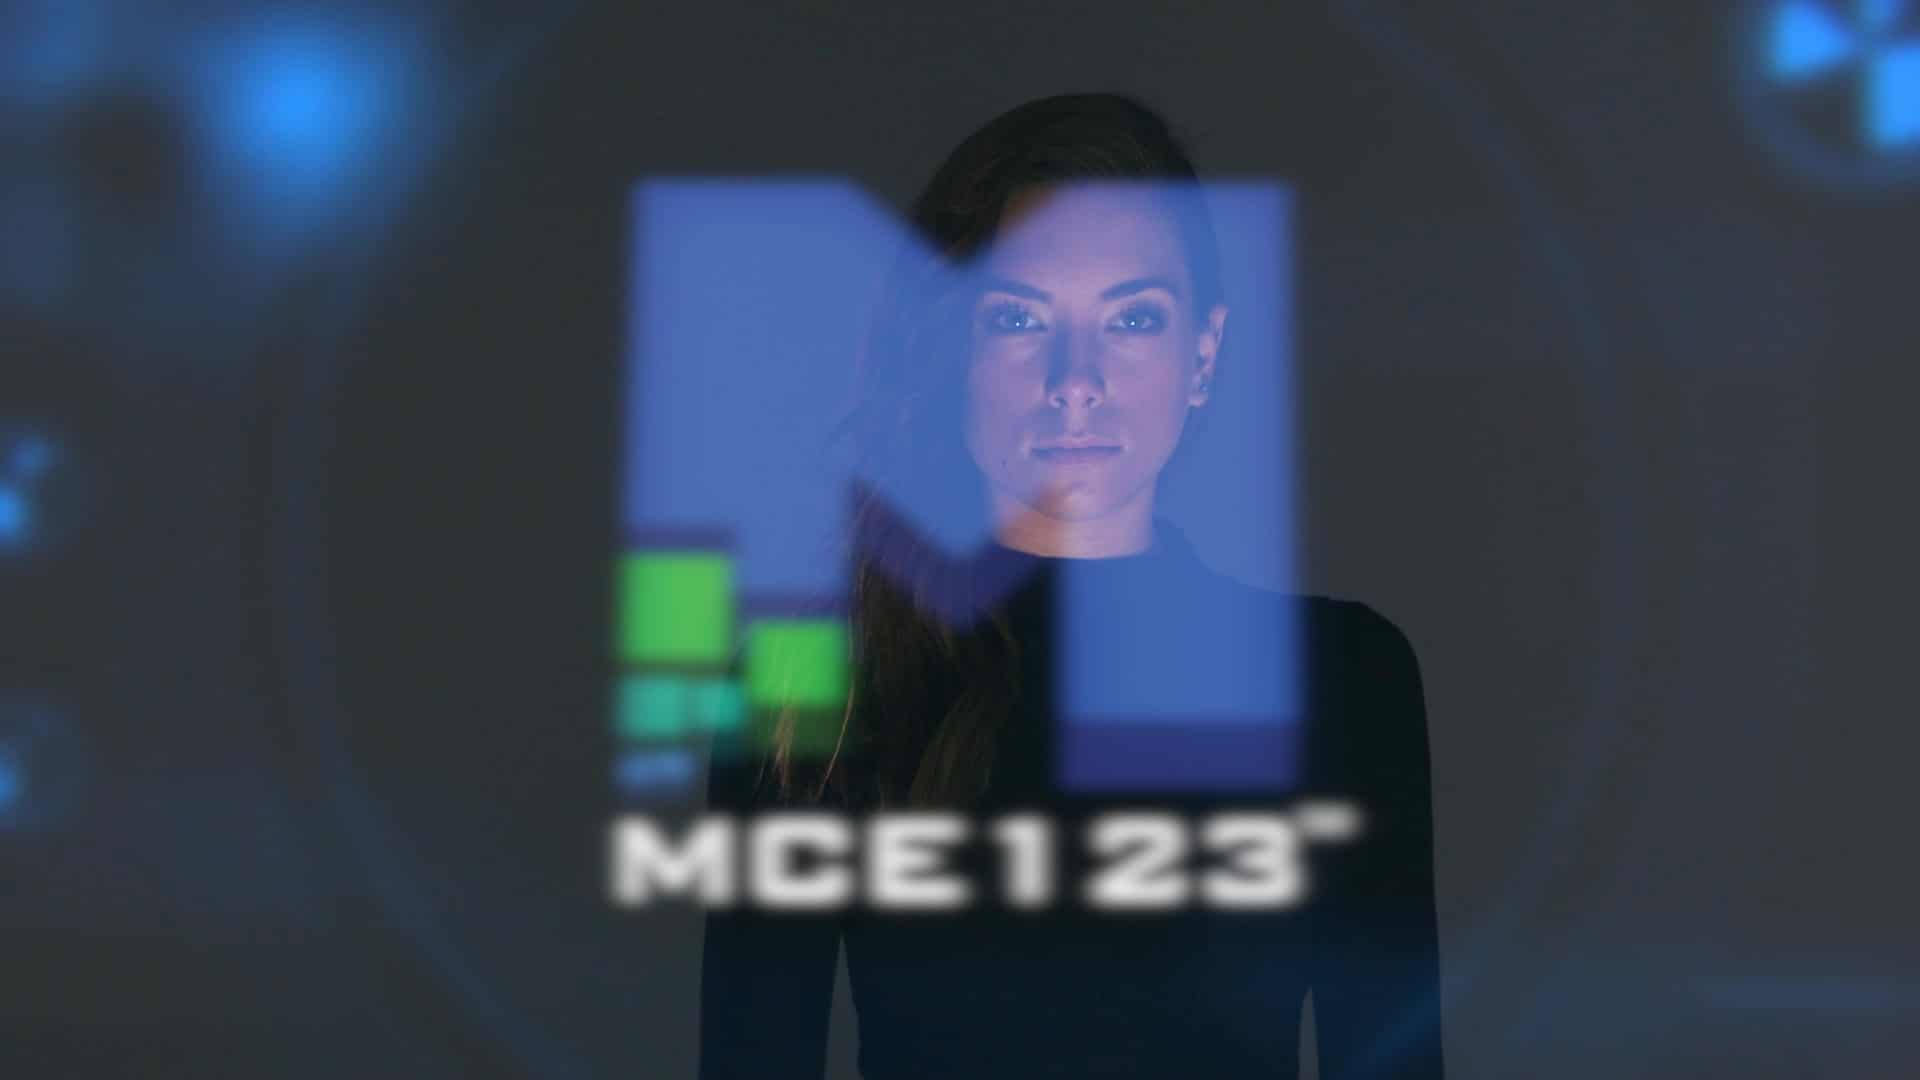 MCE123 Girl Opens A Hologram Intro Video